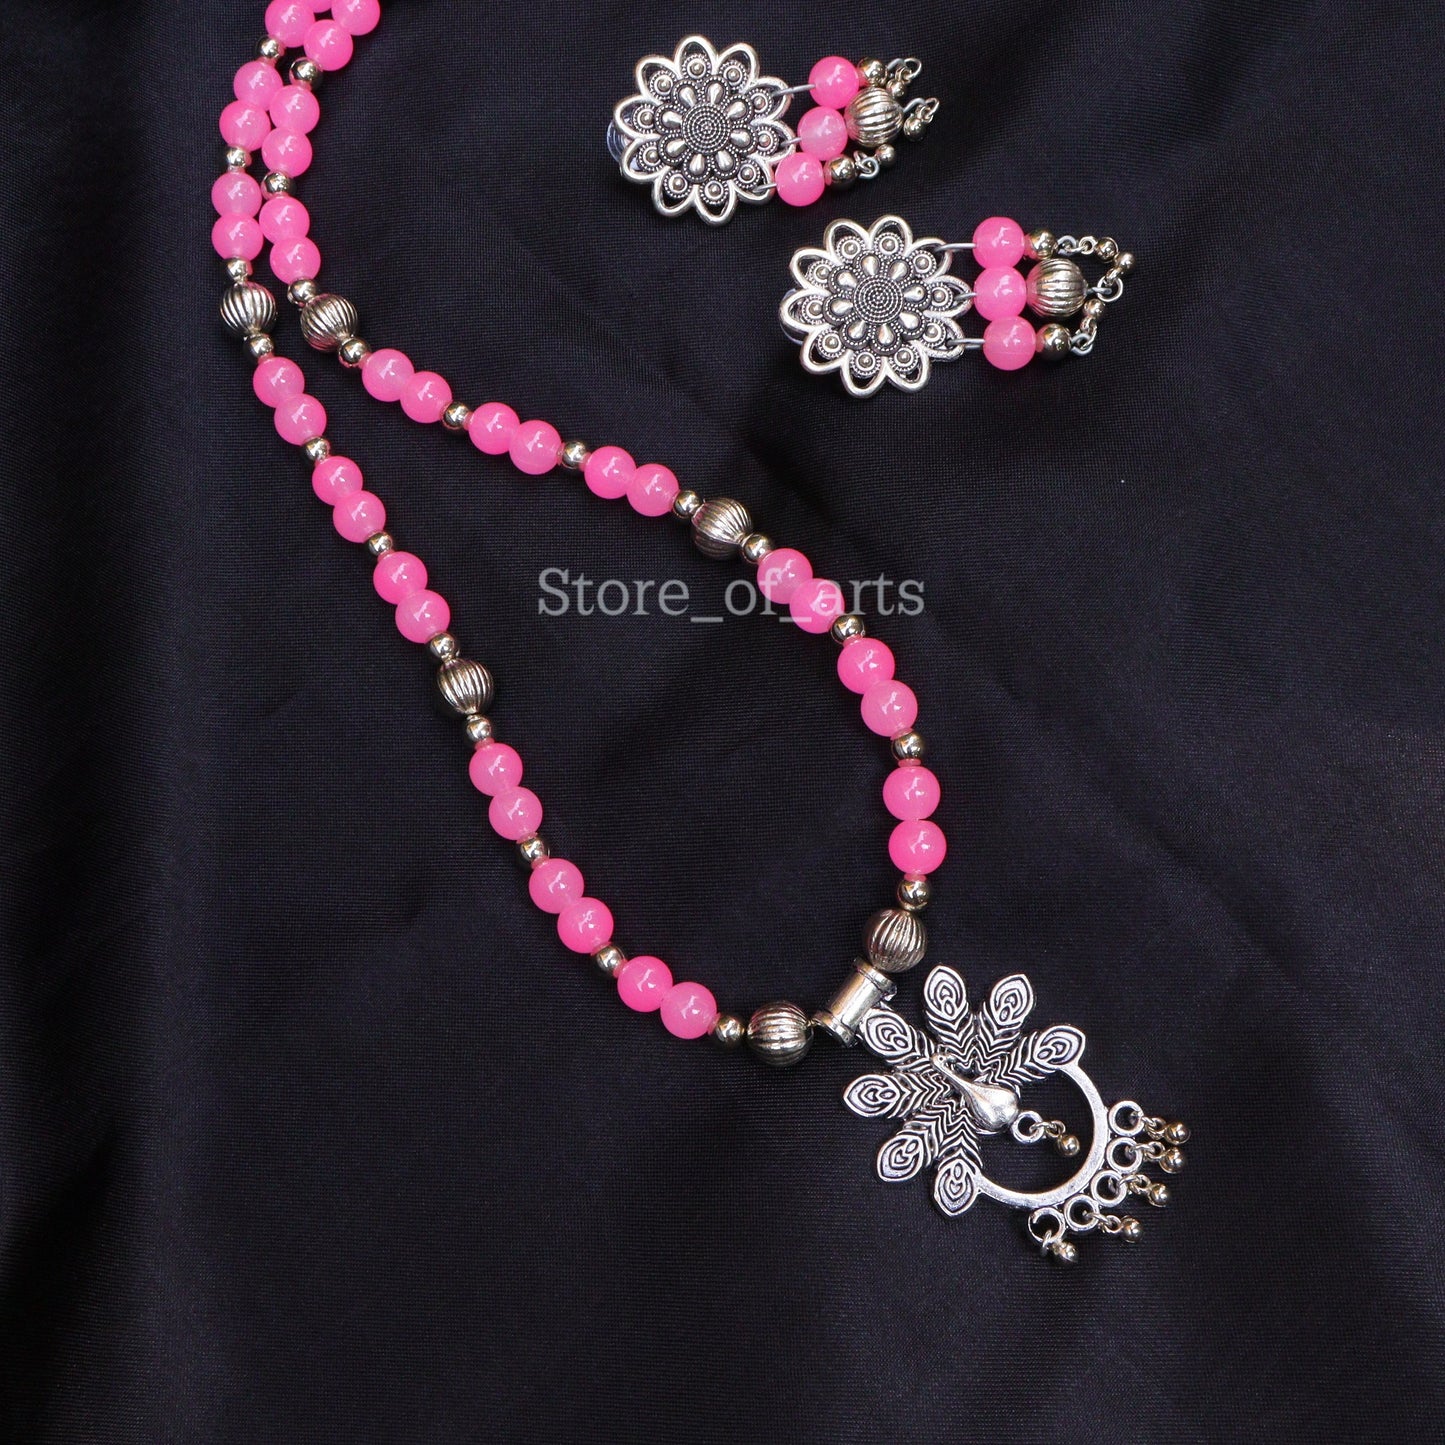 Beautiful Peacock Necklace set with earrings for women